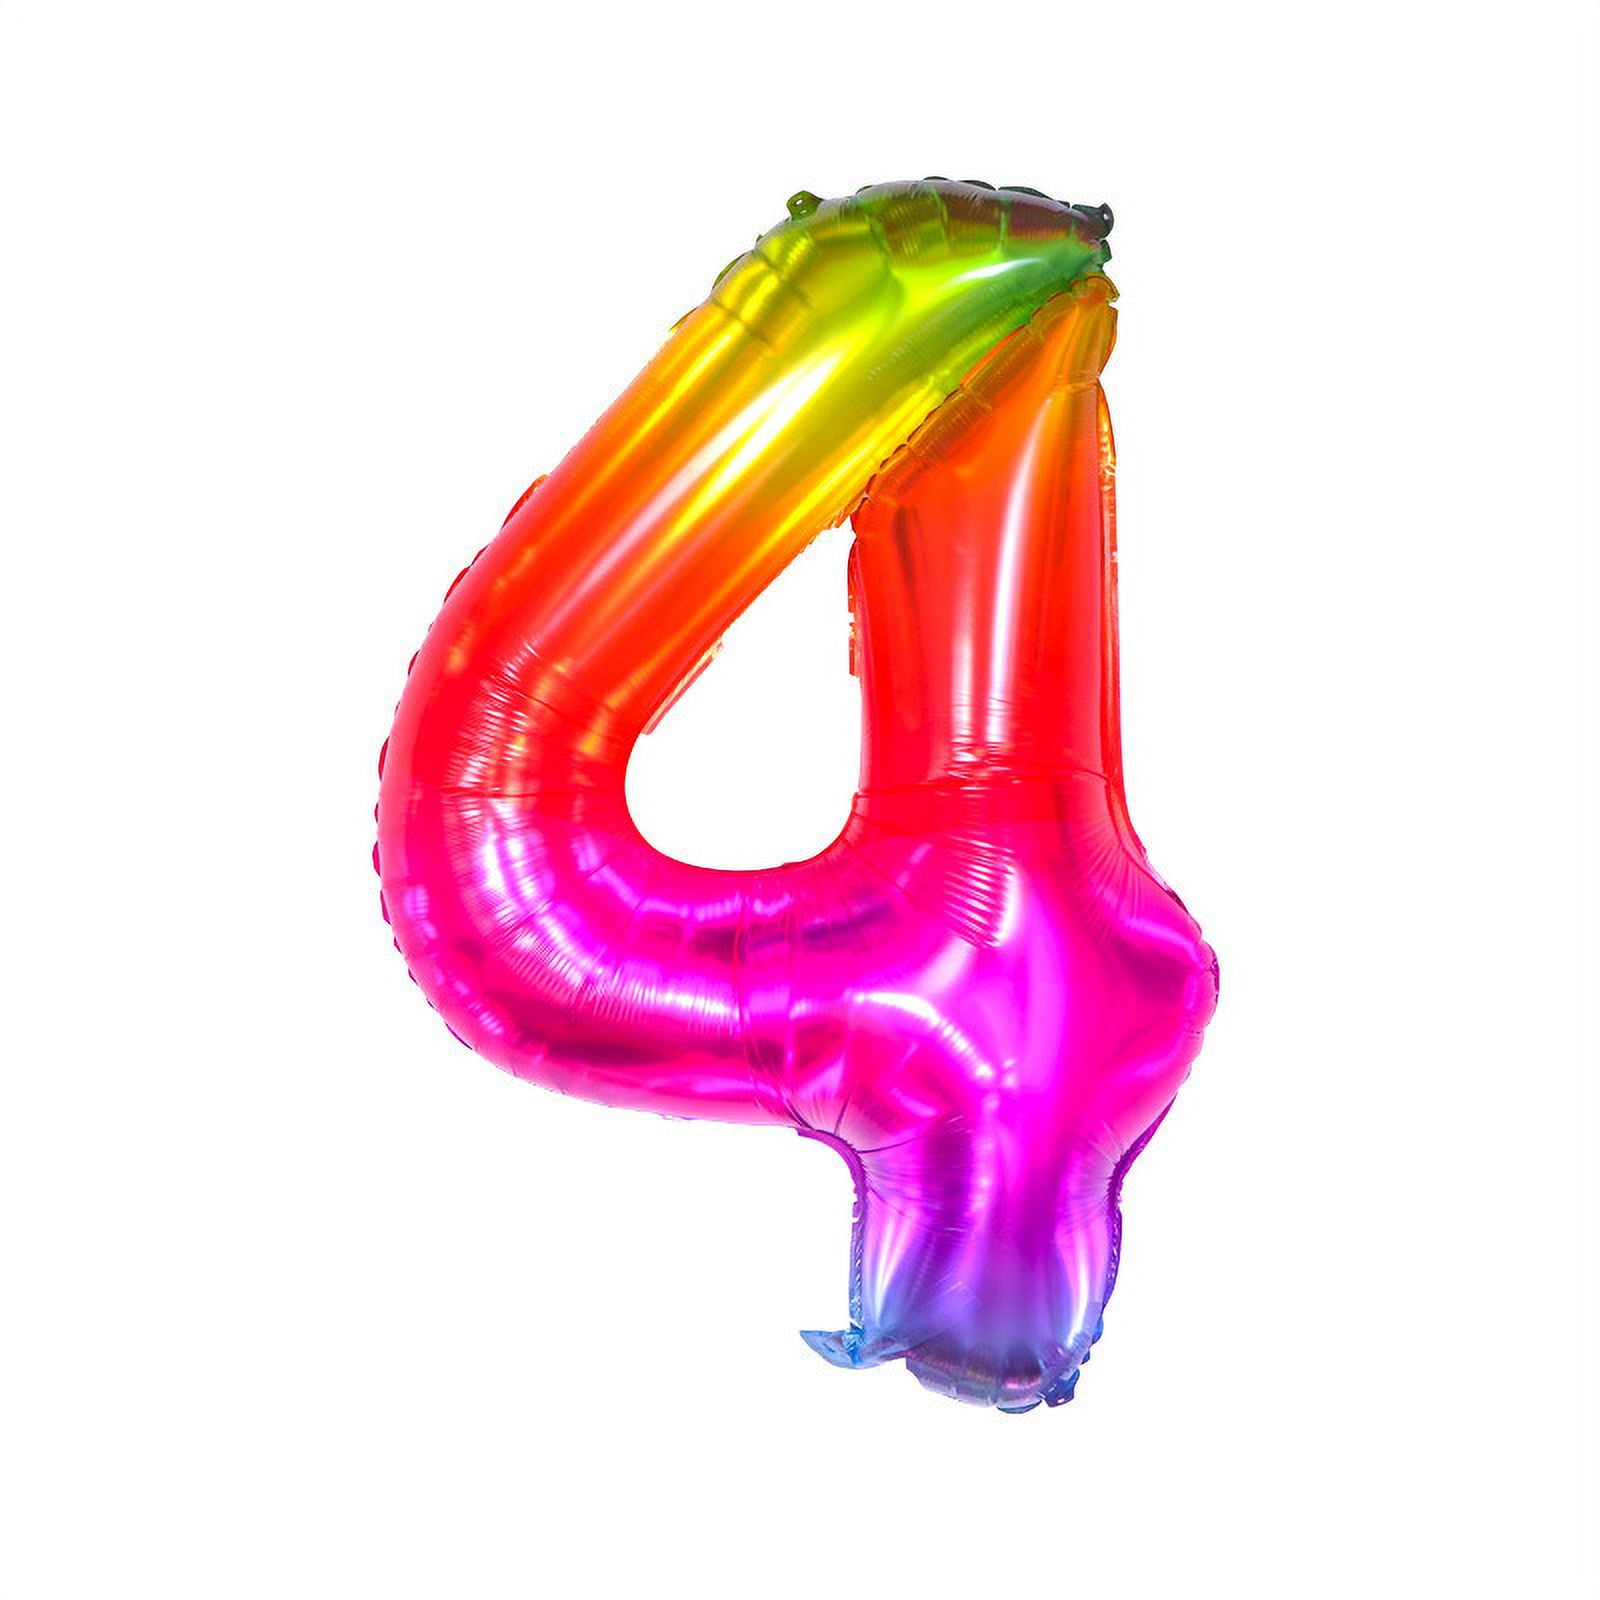 Giant Rainbow Jelly Number - Large, 40 Inch, Rainbow Birthday Decorations, Tie Dye Balloons For Party Decor